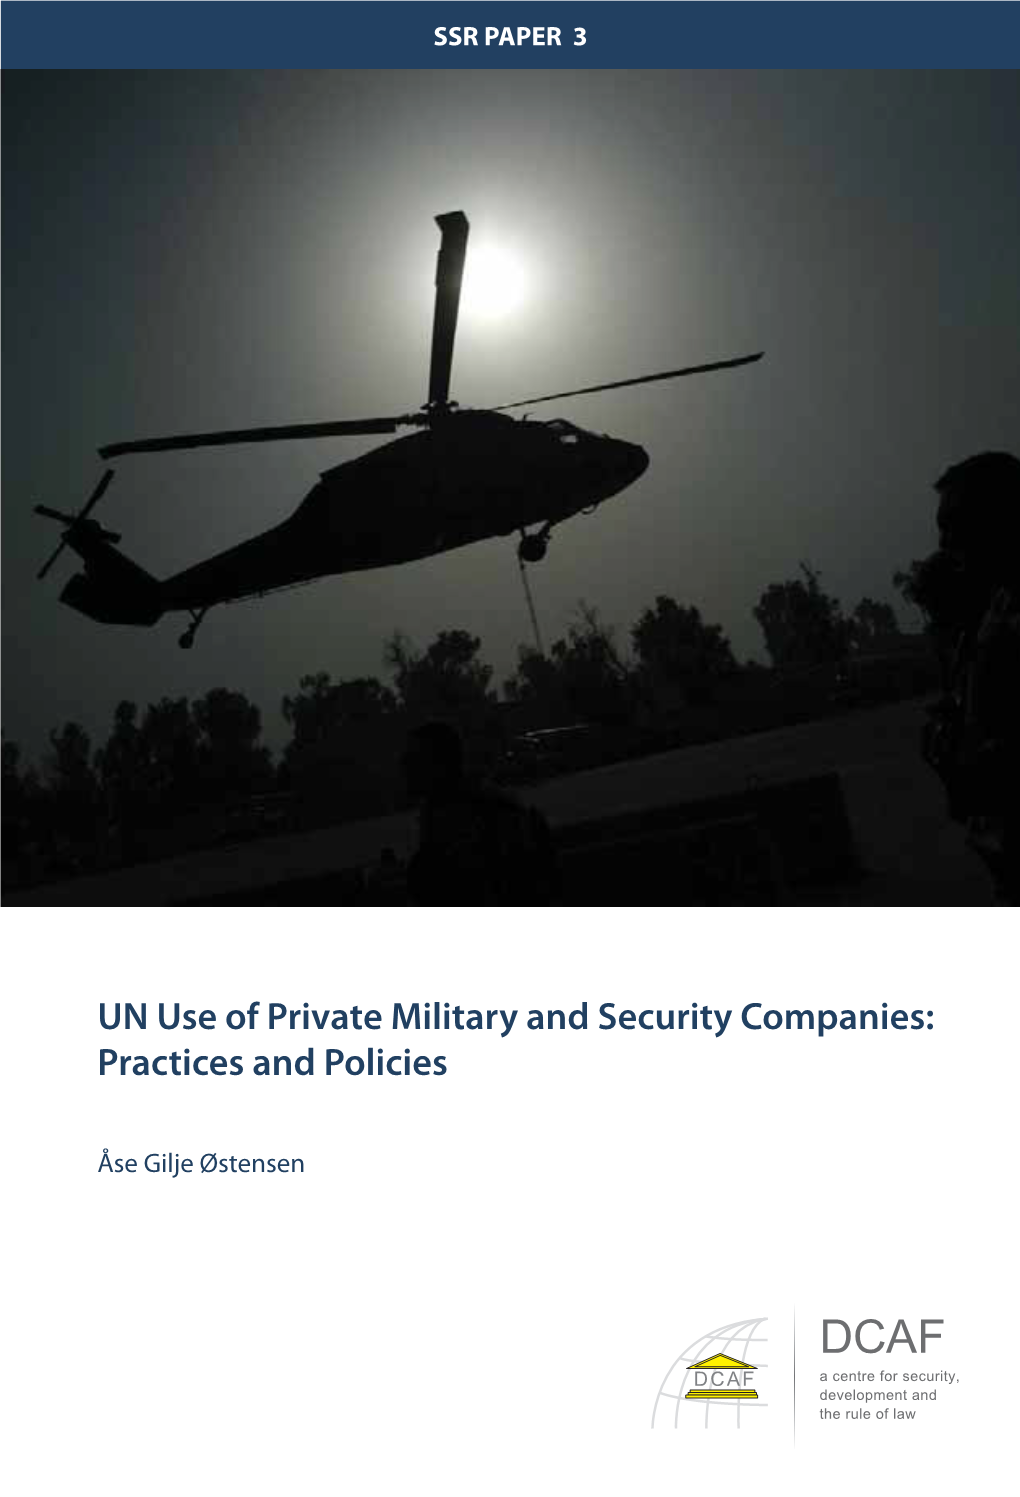 UN Use of Private Military and Security Companies: Practices and Policies